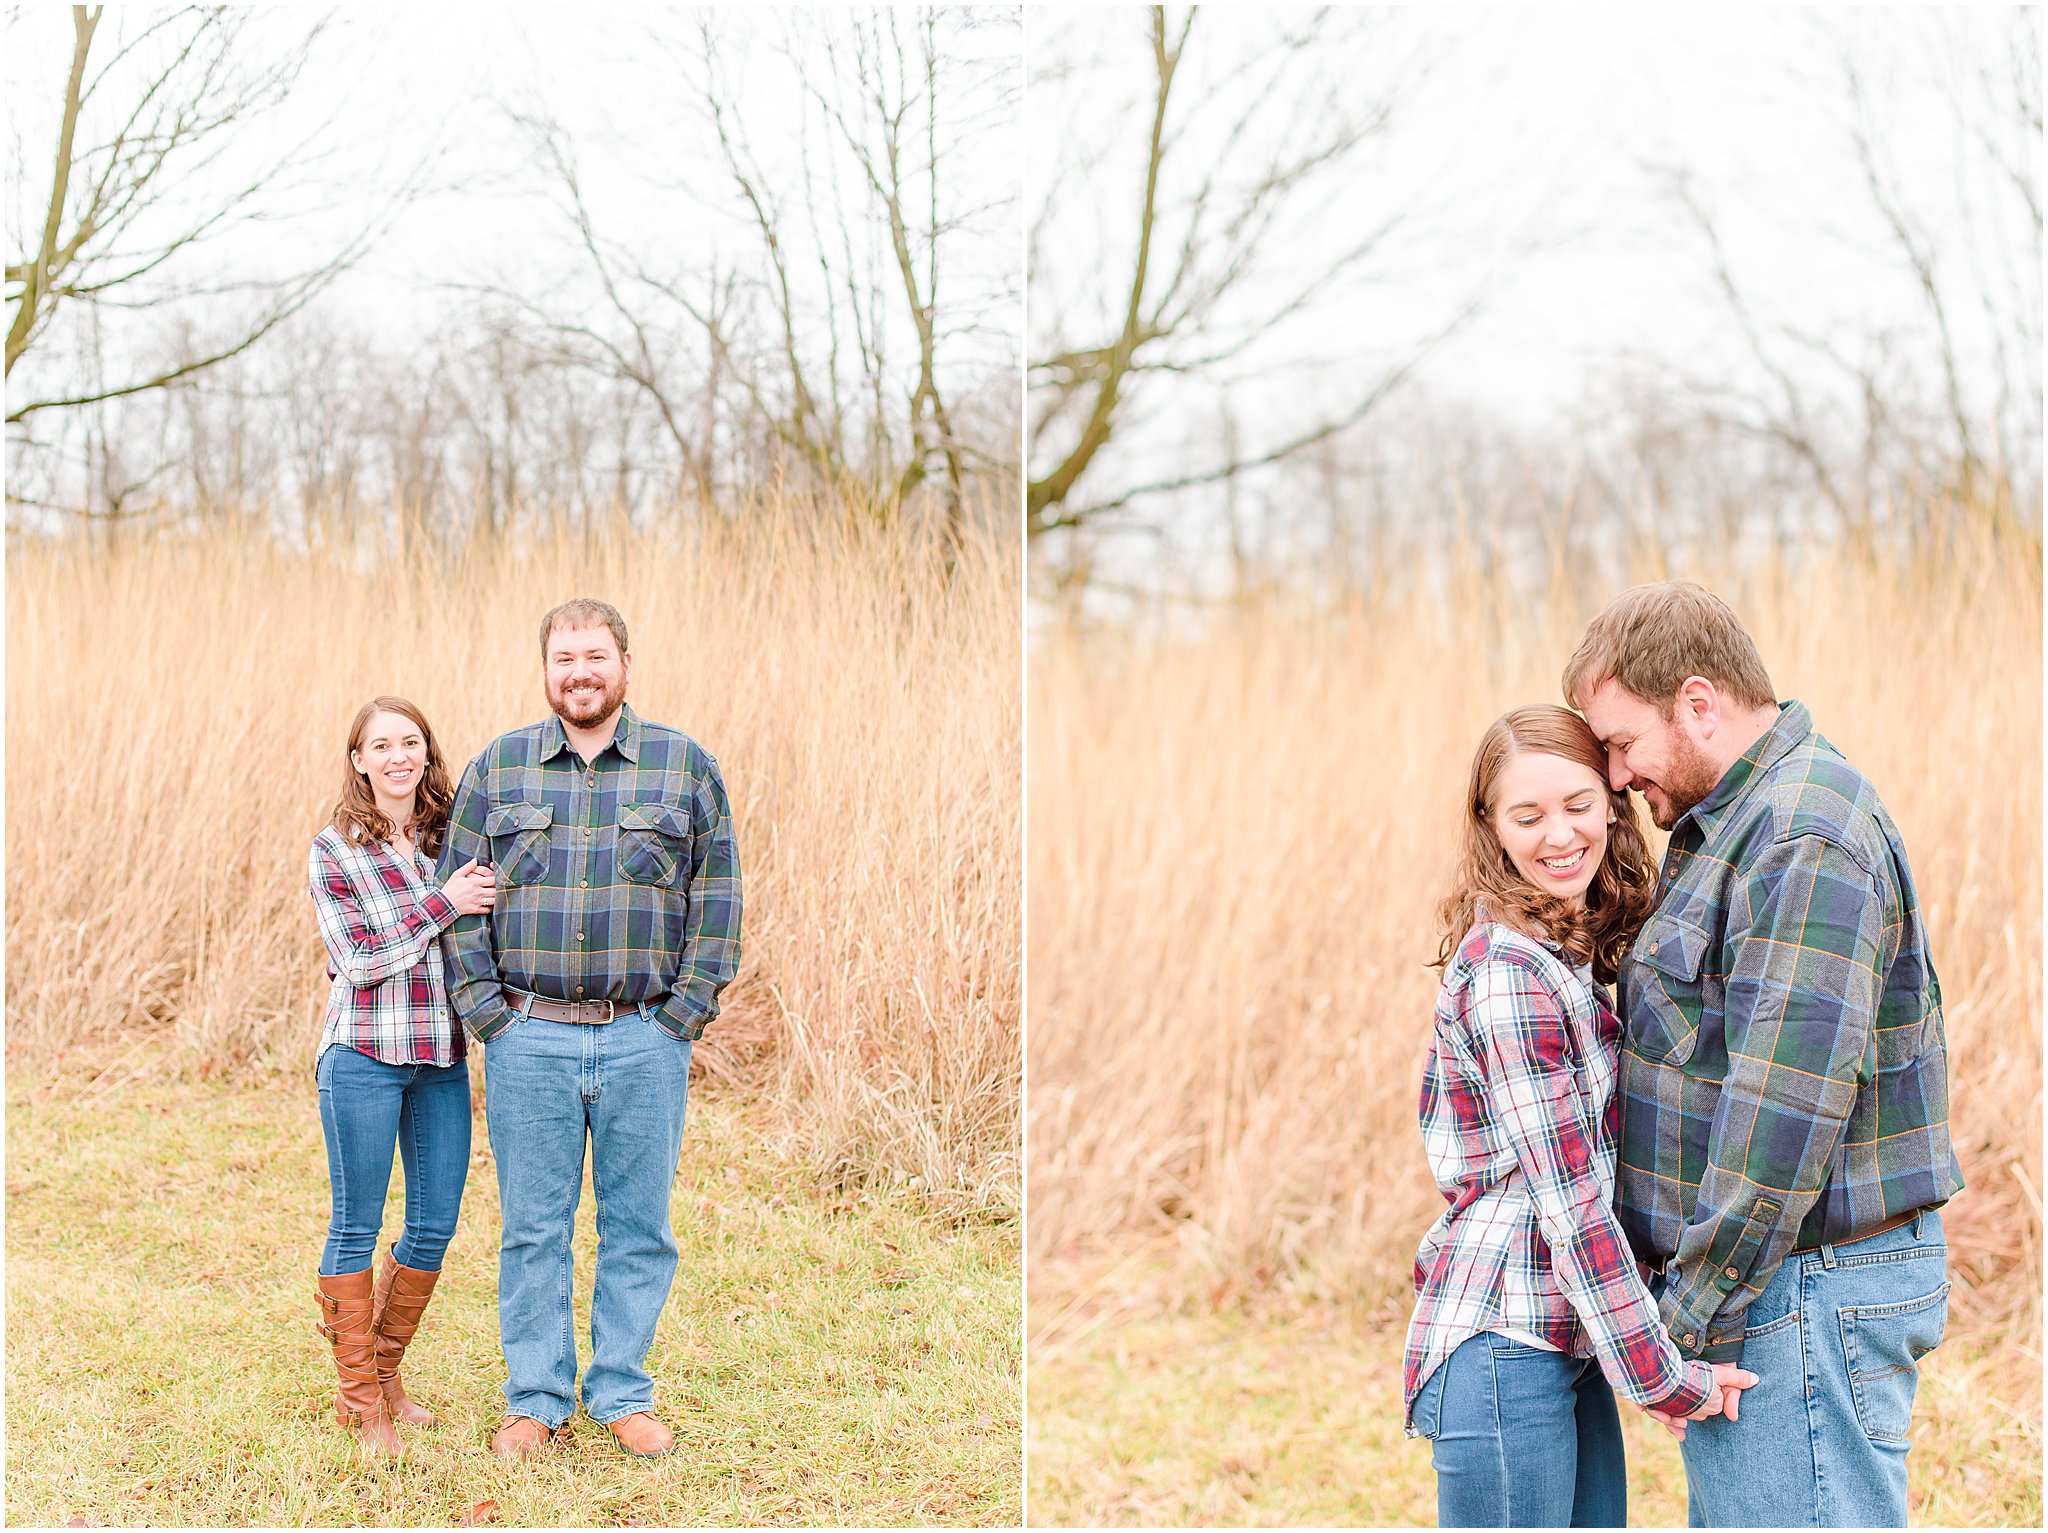 Couple nuzzling and smiling during Eagle Creek Park engagement session